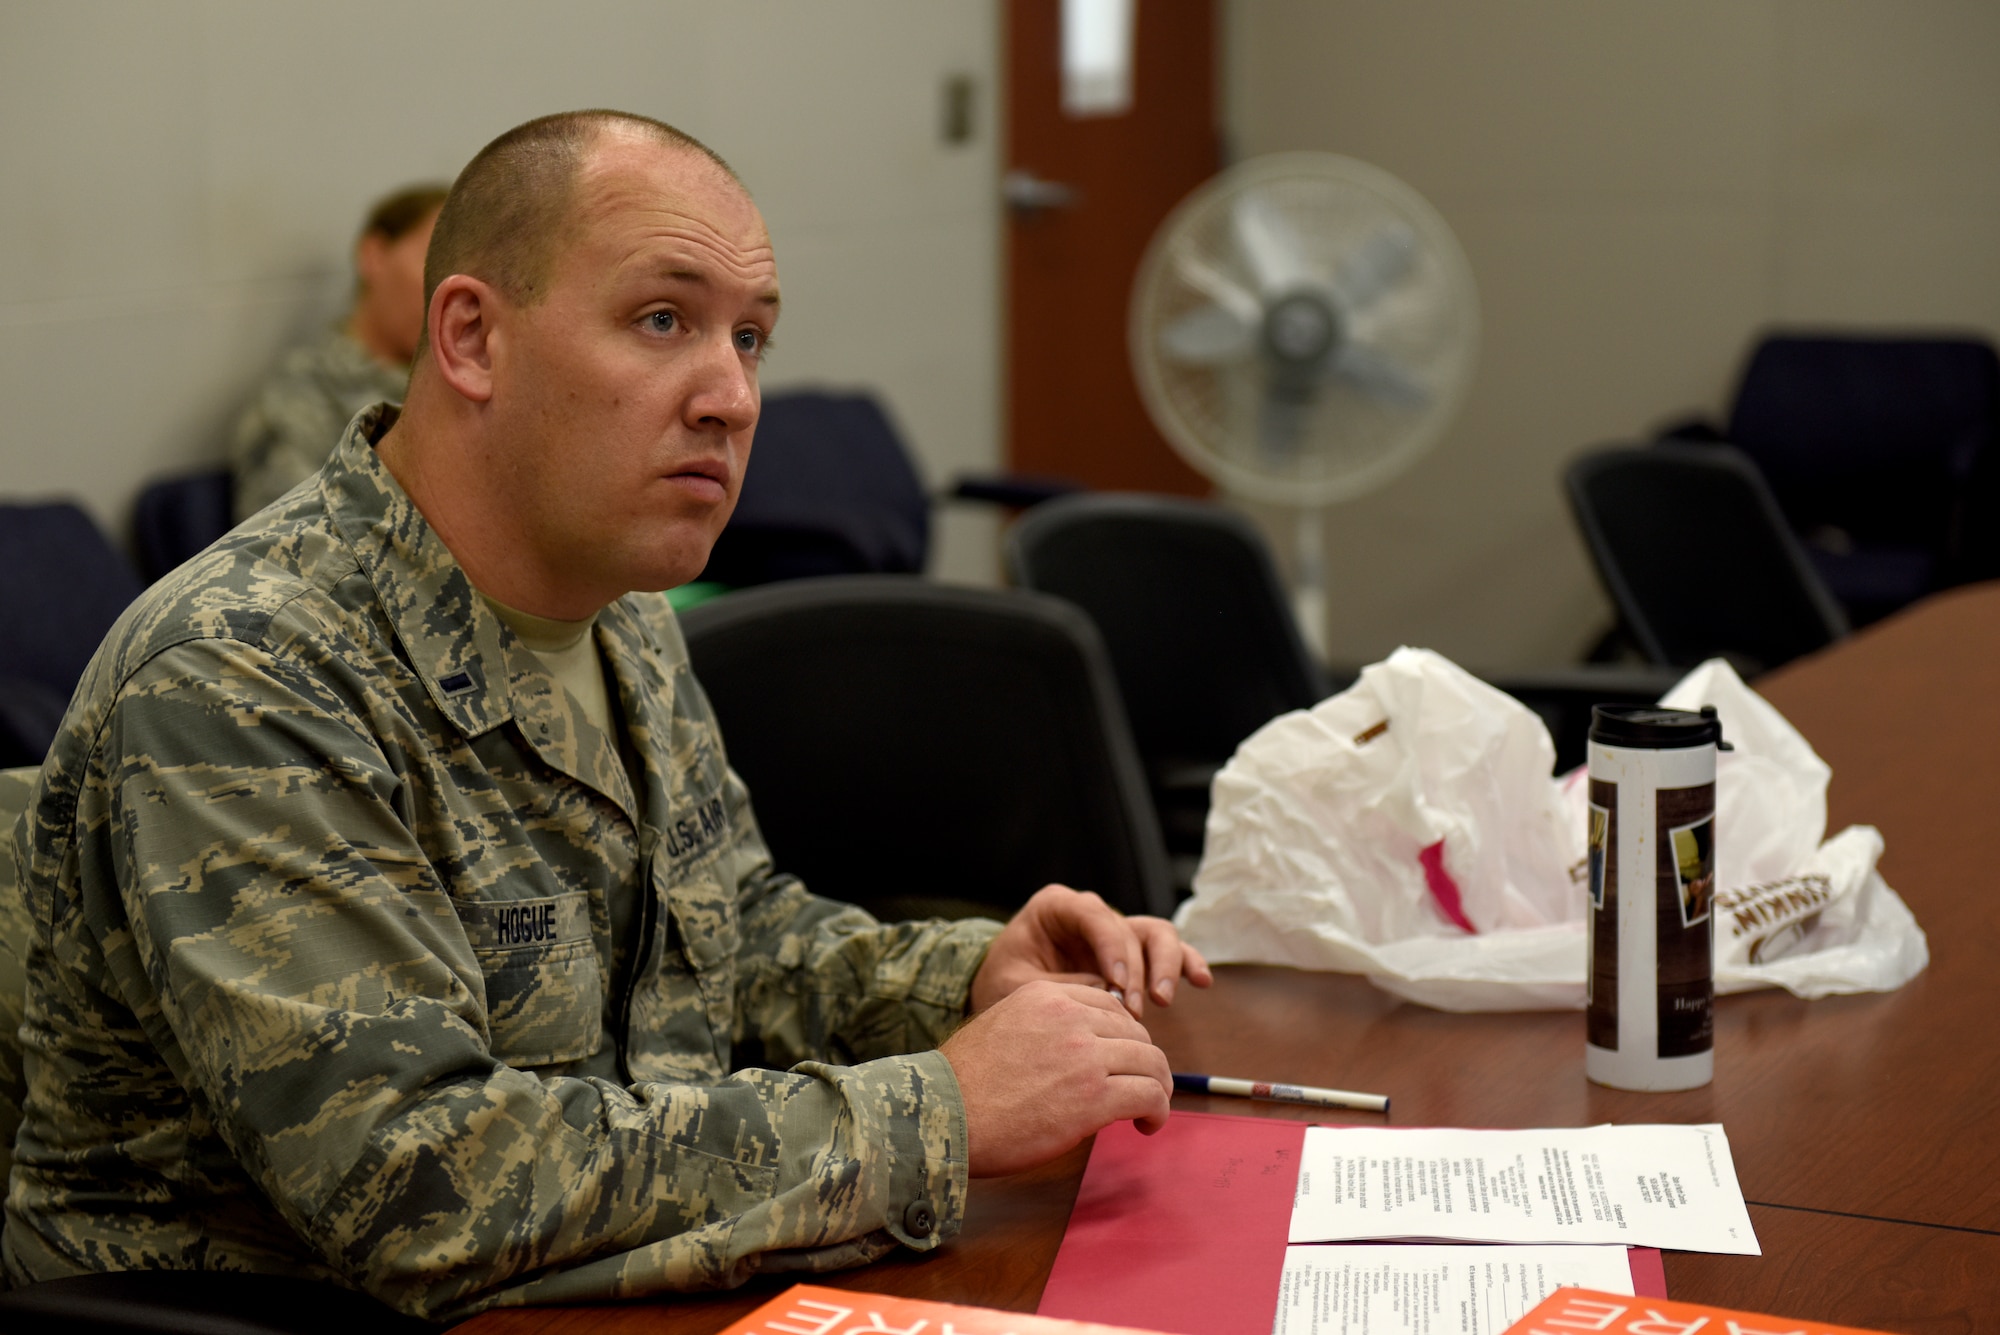 U.S. Air Force 1st Lt. Jack Hogue, operations officer with the 145th Logistics Readiness Squadron (LRS), listens as Senior Master Sgt. Gene Katz, operations and compliance superintendent with the 145th LRS briefs personnel assigned to an 11-person team ready to assist in Hurricane Florence Relief efforts at the North Carolina (N.C.) Air National Guard Base, Charlotte Douglas International Airport, Sept.17, 2018.  The 11-person team will create and move pallets filled with supplies like food and water in a Kinston, N.C. airport.